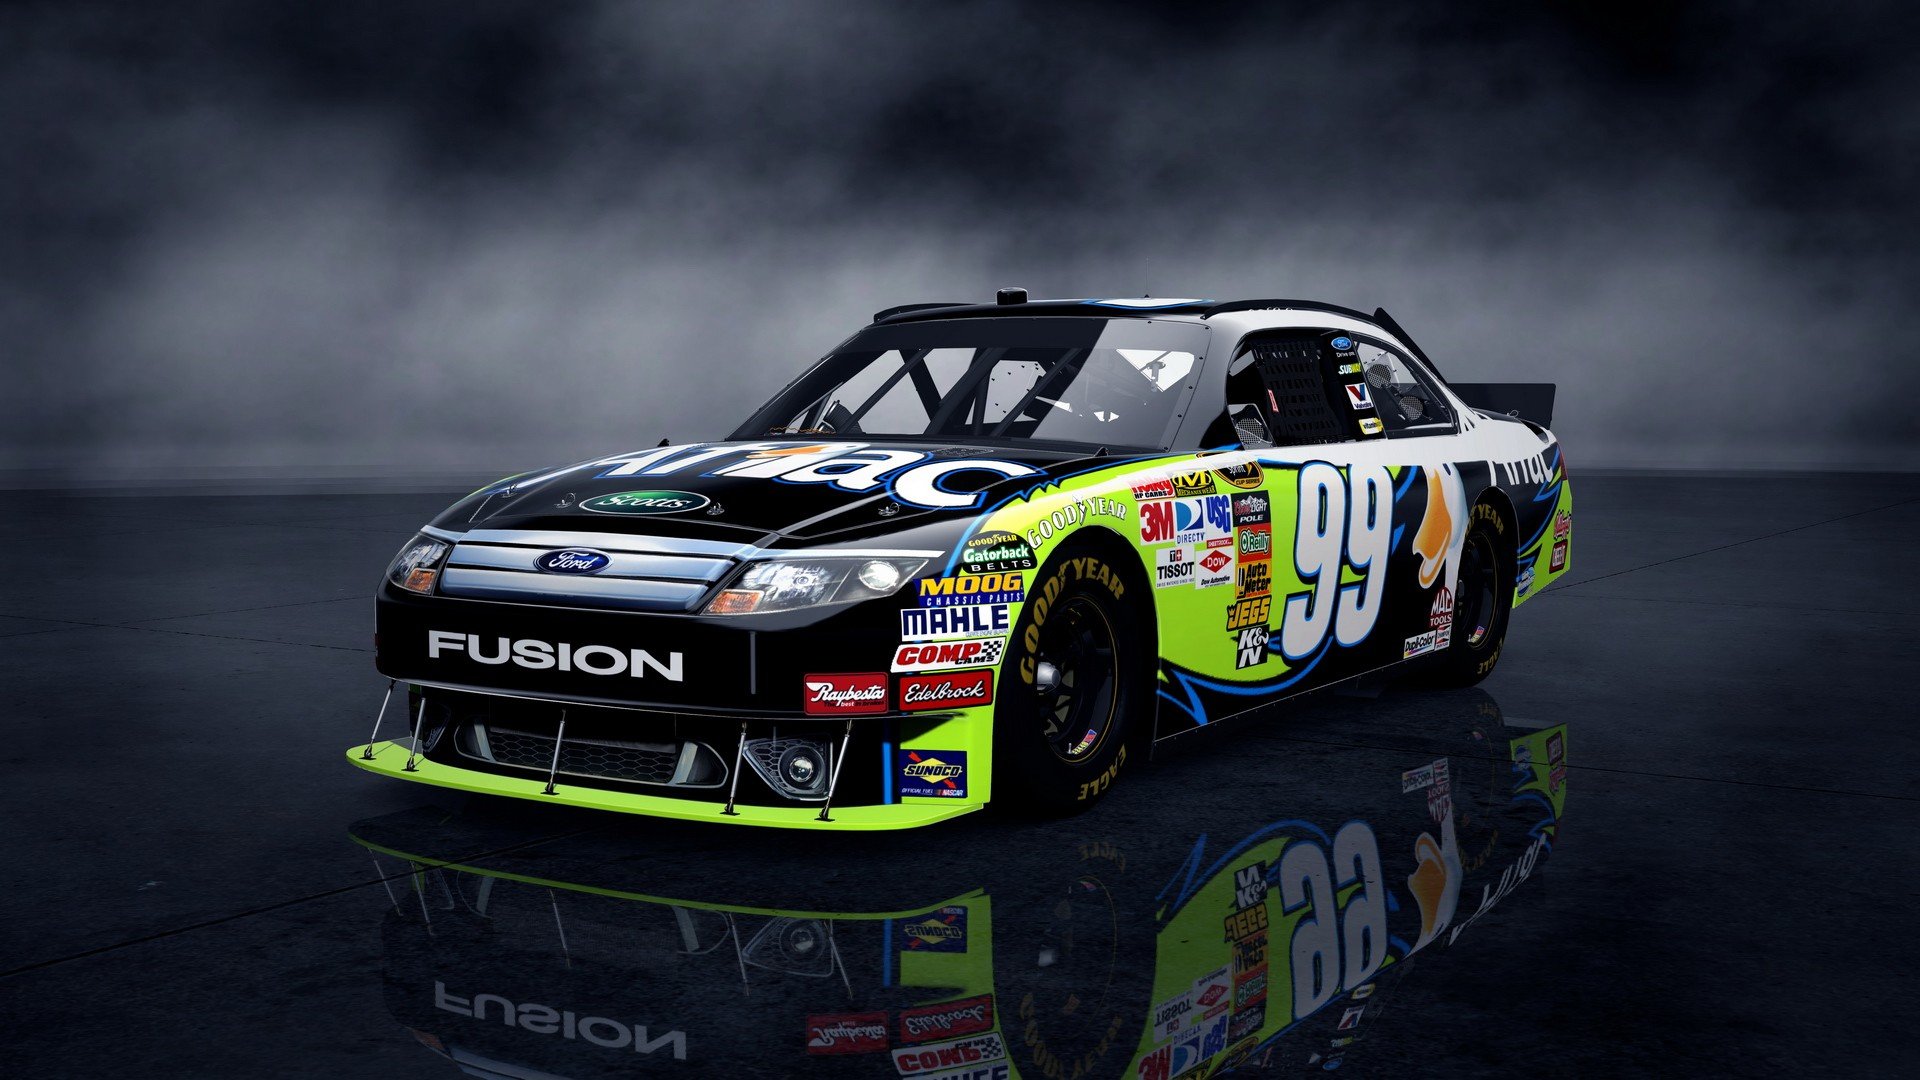 Vehicles Nascar Wheels Ford Fusion Automobiles Wallpaper Background